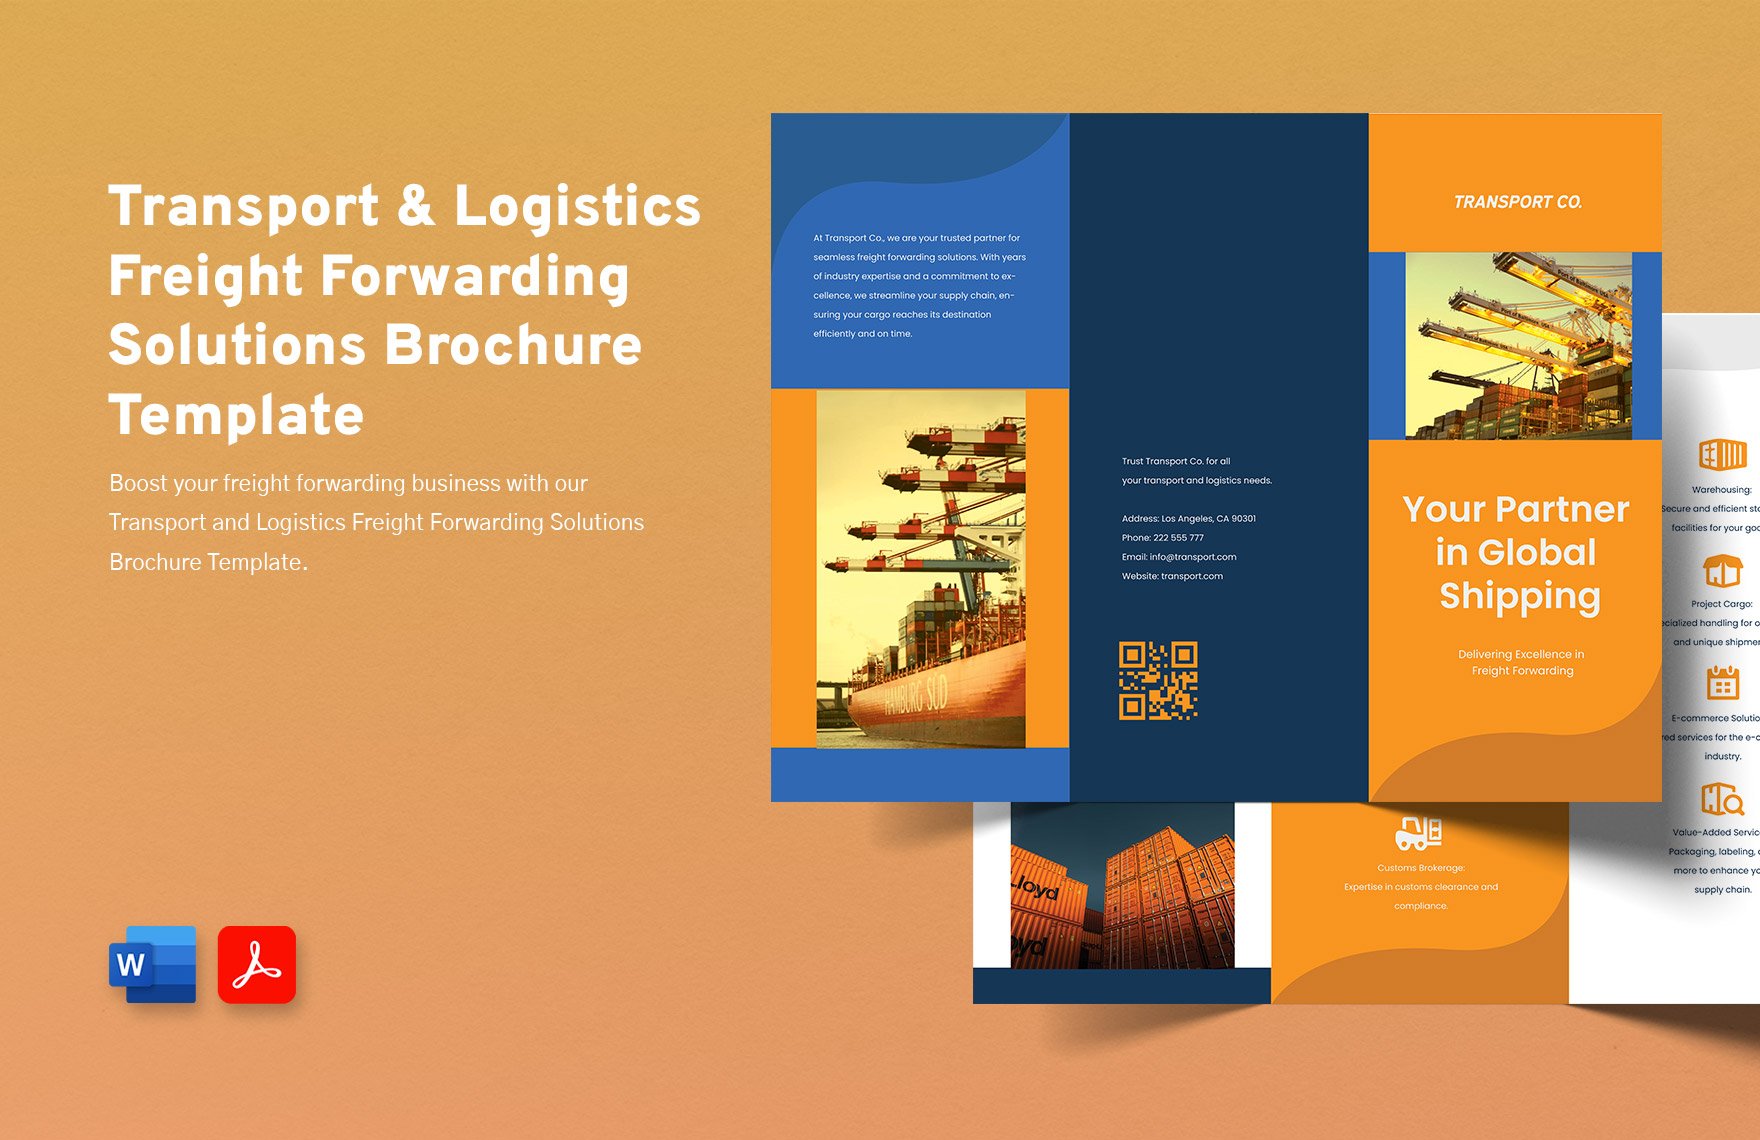 Transport and Logistics Freight Forwarding Solutions Brochure Template in Word, PDF